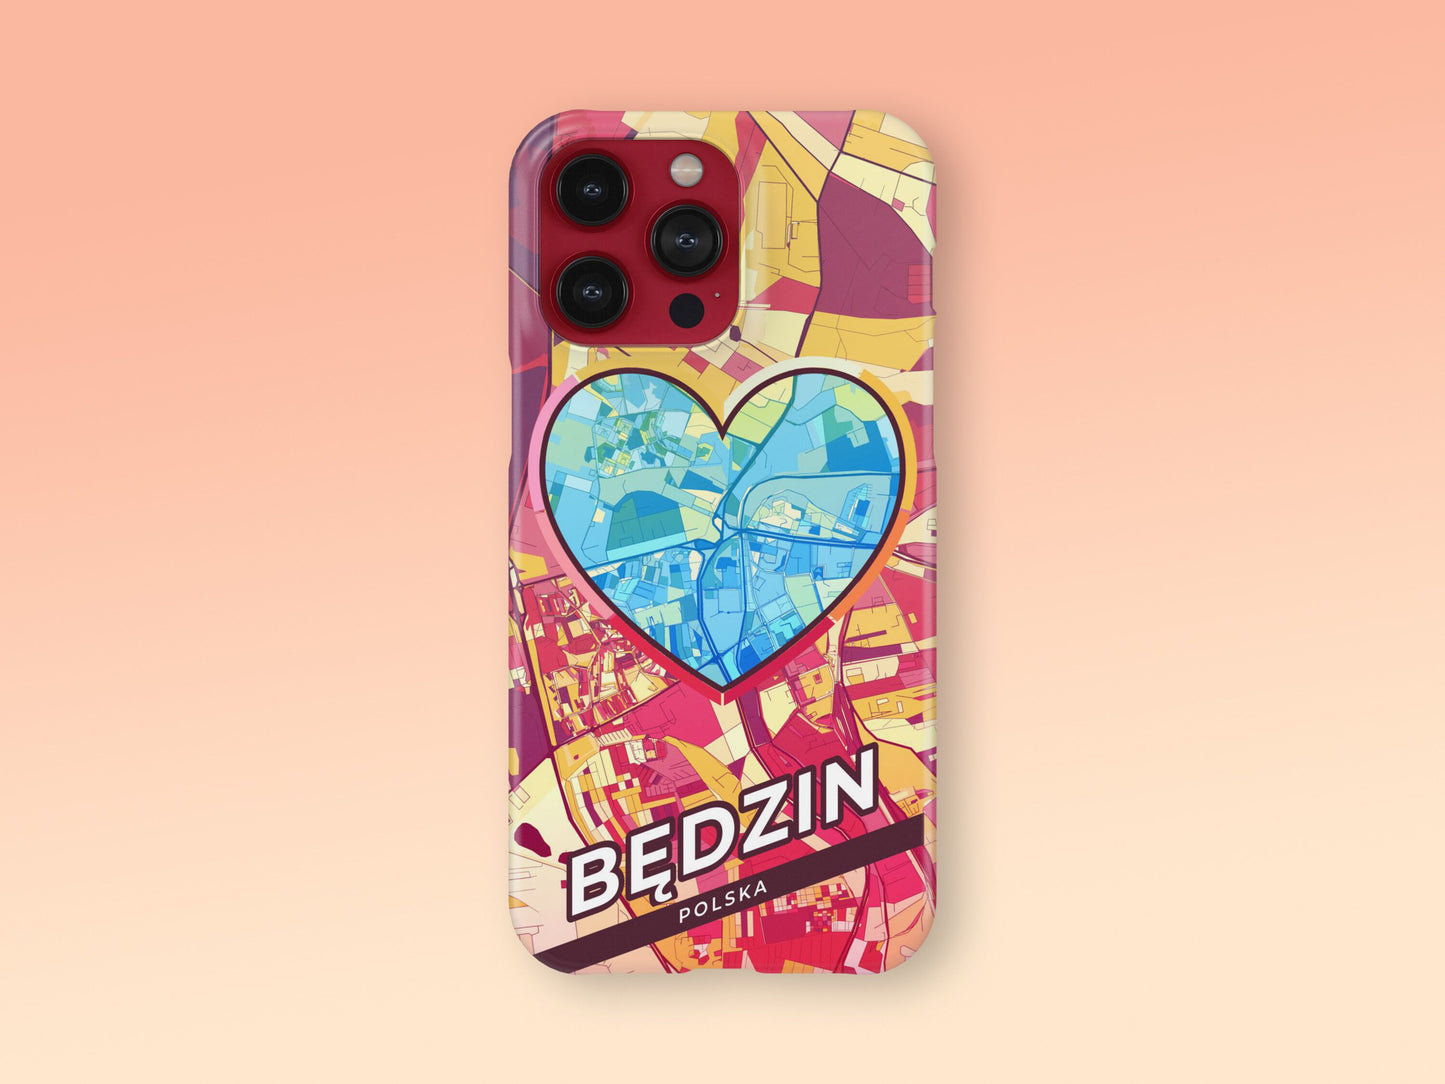 Będzin Poland slim phone case with colorful icon. Birthday, wedding or housewarming gift. Couple match cases. 2